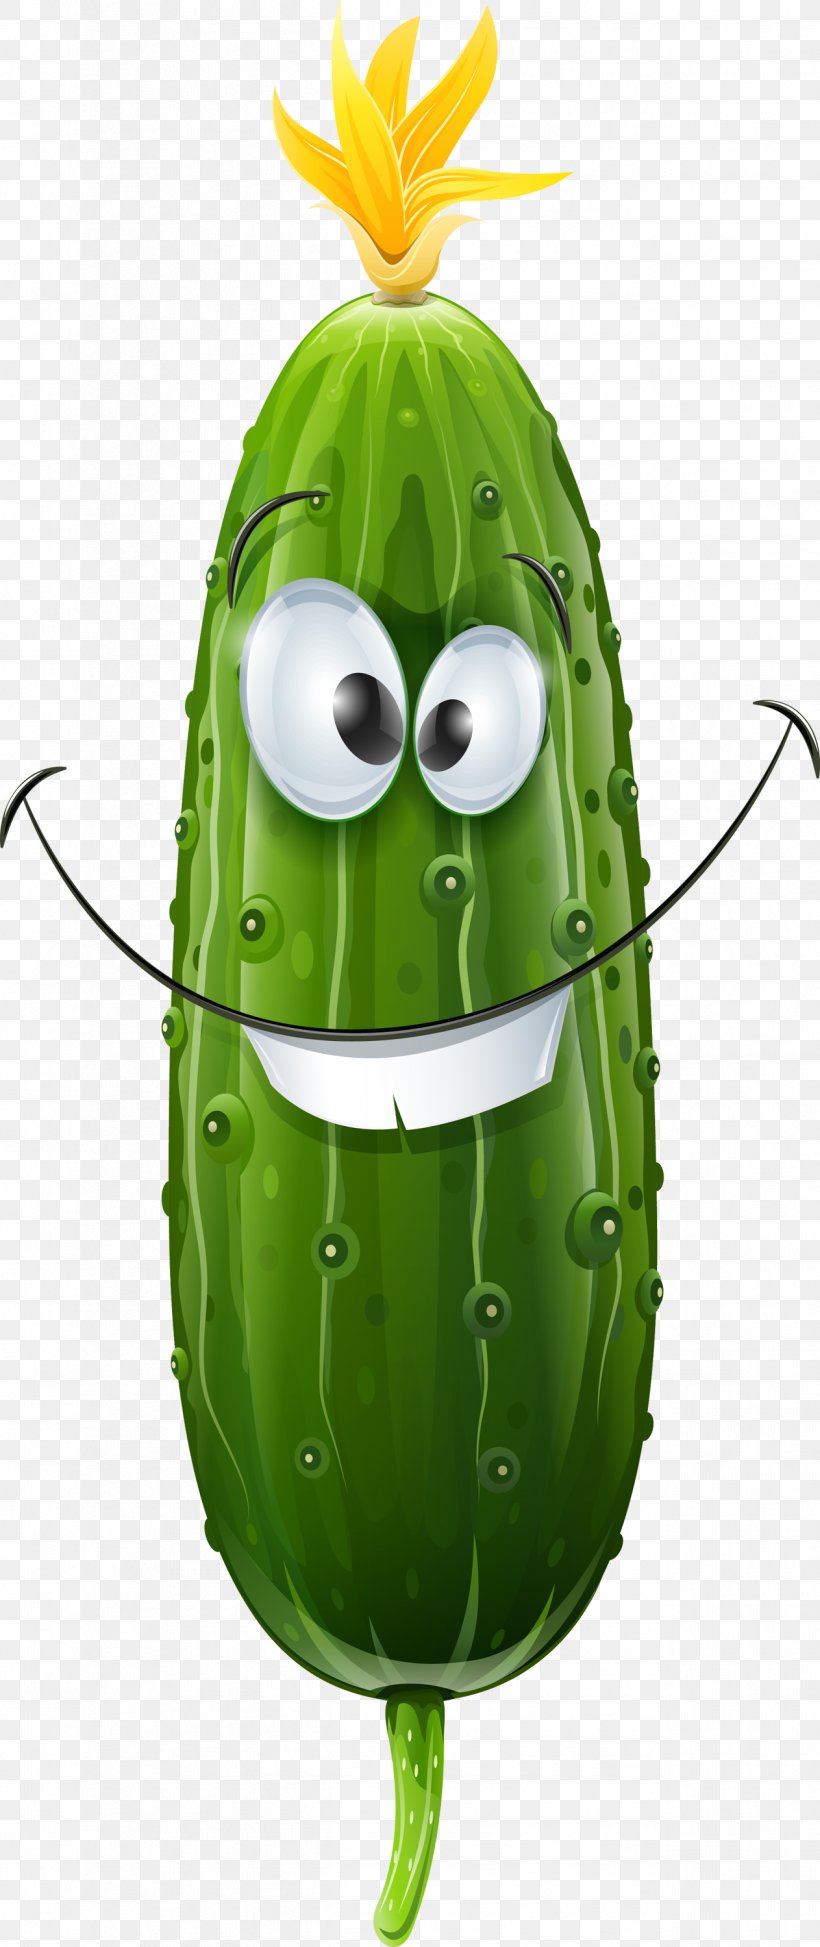 14000 Cucumber Drawing Stock Photos Pictures  RoyaltyFree Images   iStock  Cucumber illustration